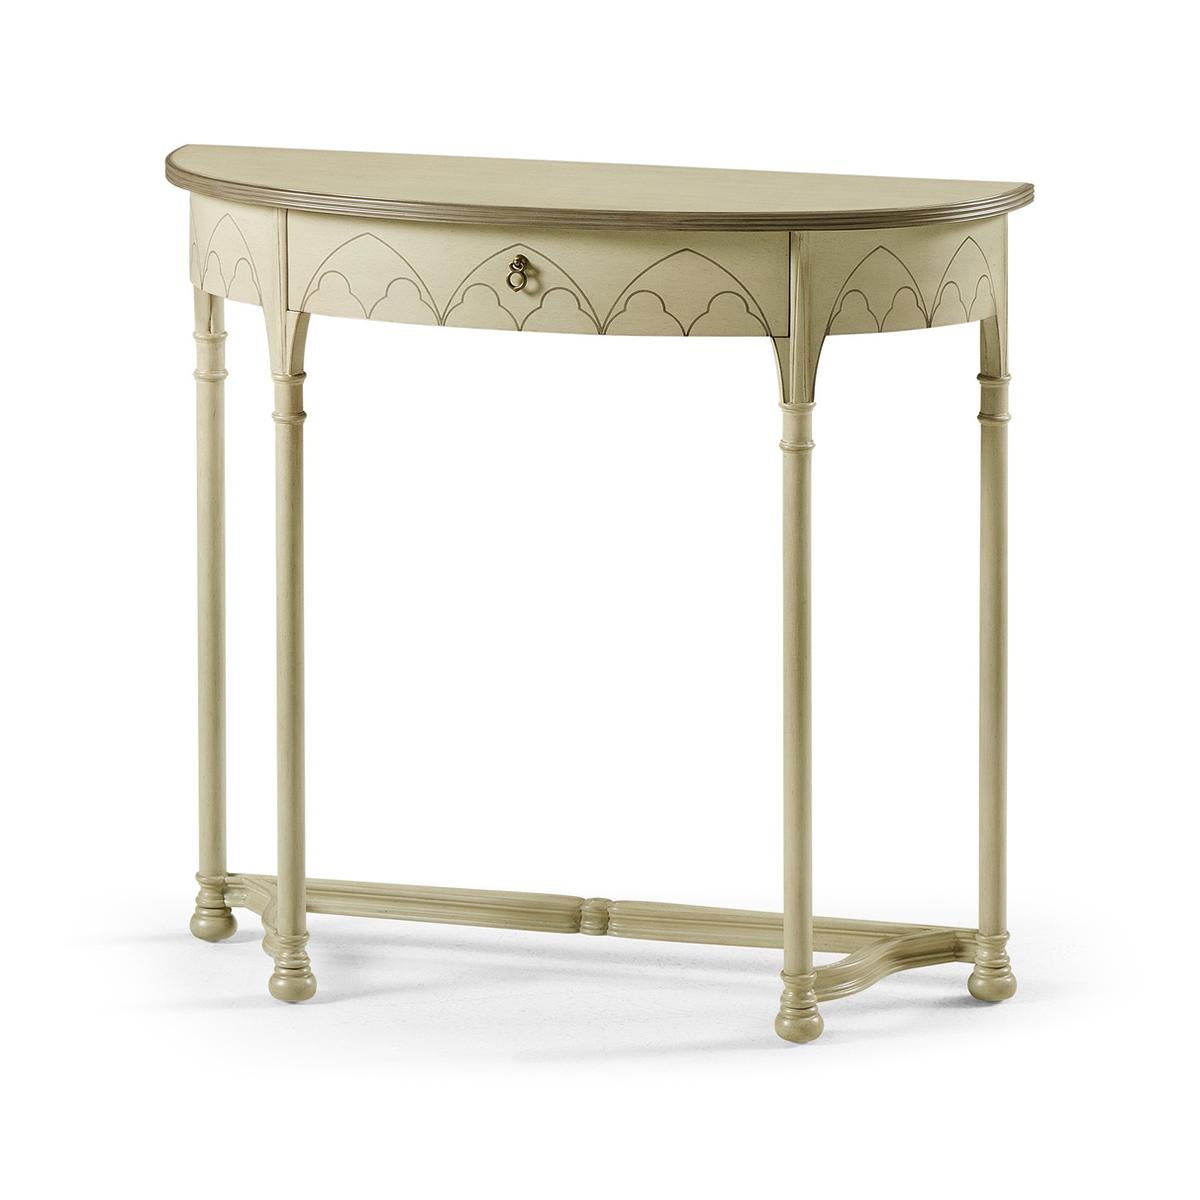 Gothic painted console tables with an antique clary sage finish, in an 18th-century gothic style, the demilune half-round form with fine contrasting inlays to the top and frieze, and legs with painted running floral motifs and arches.

Dimensions: